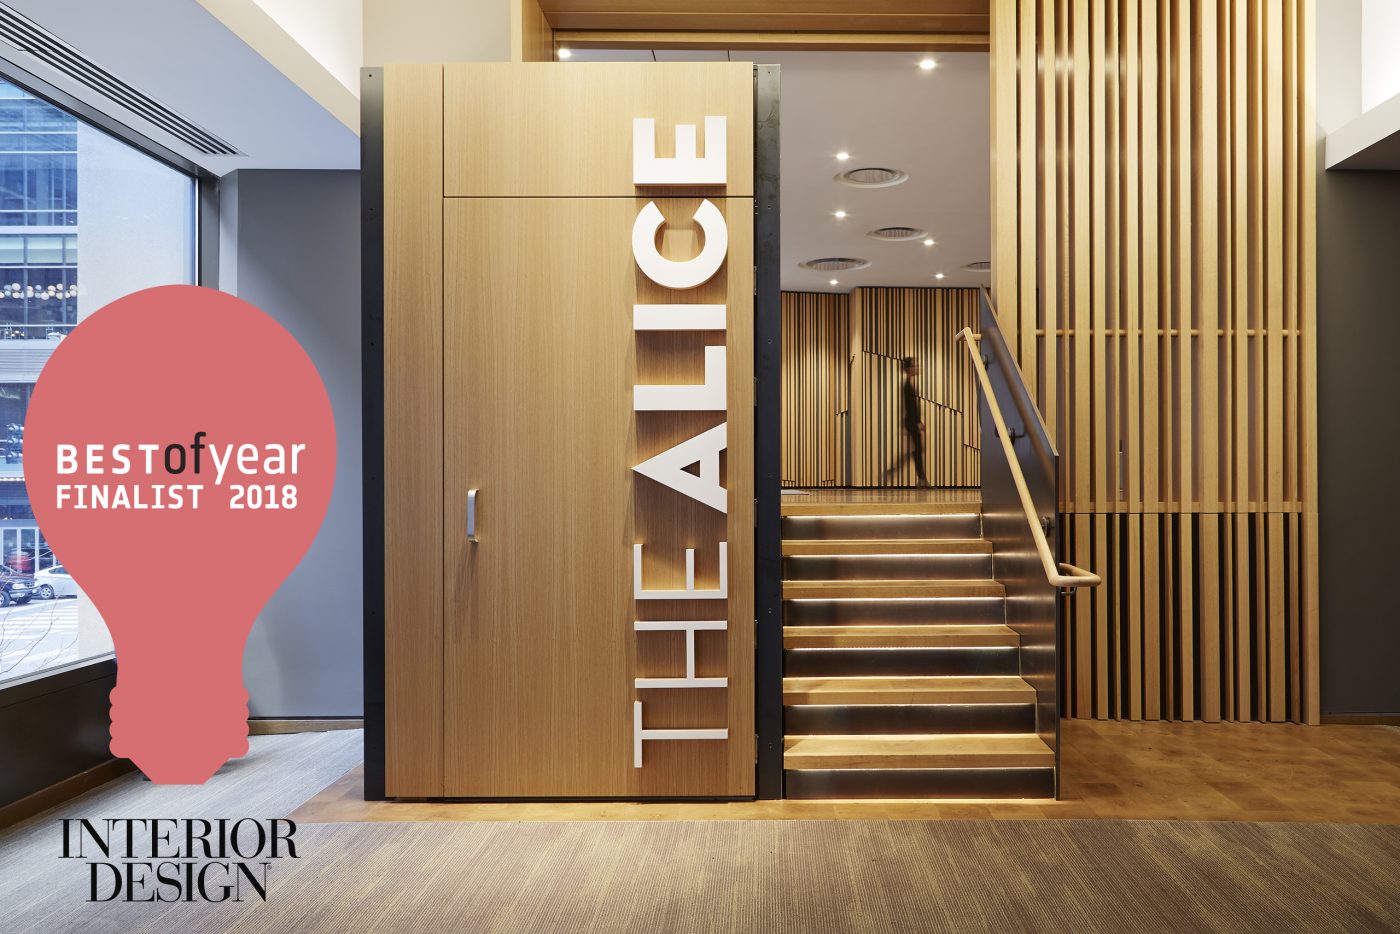 The Alice Is A Finalist For The 2018 Interior Design Best Of